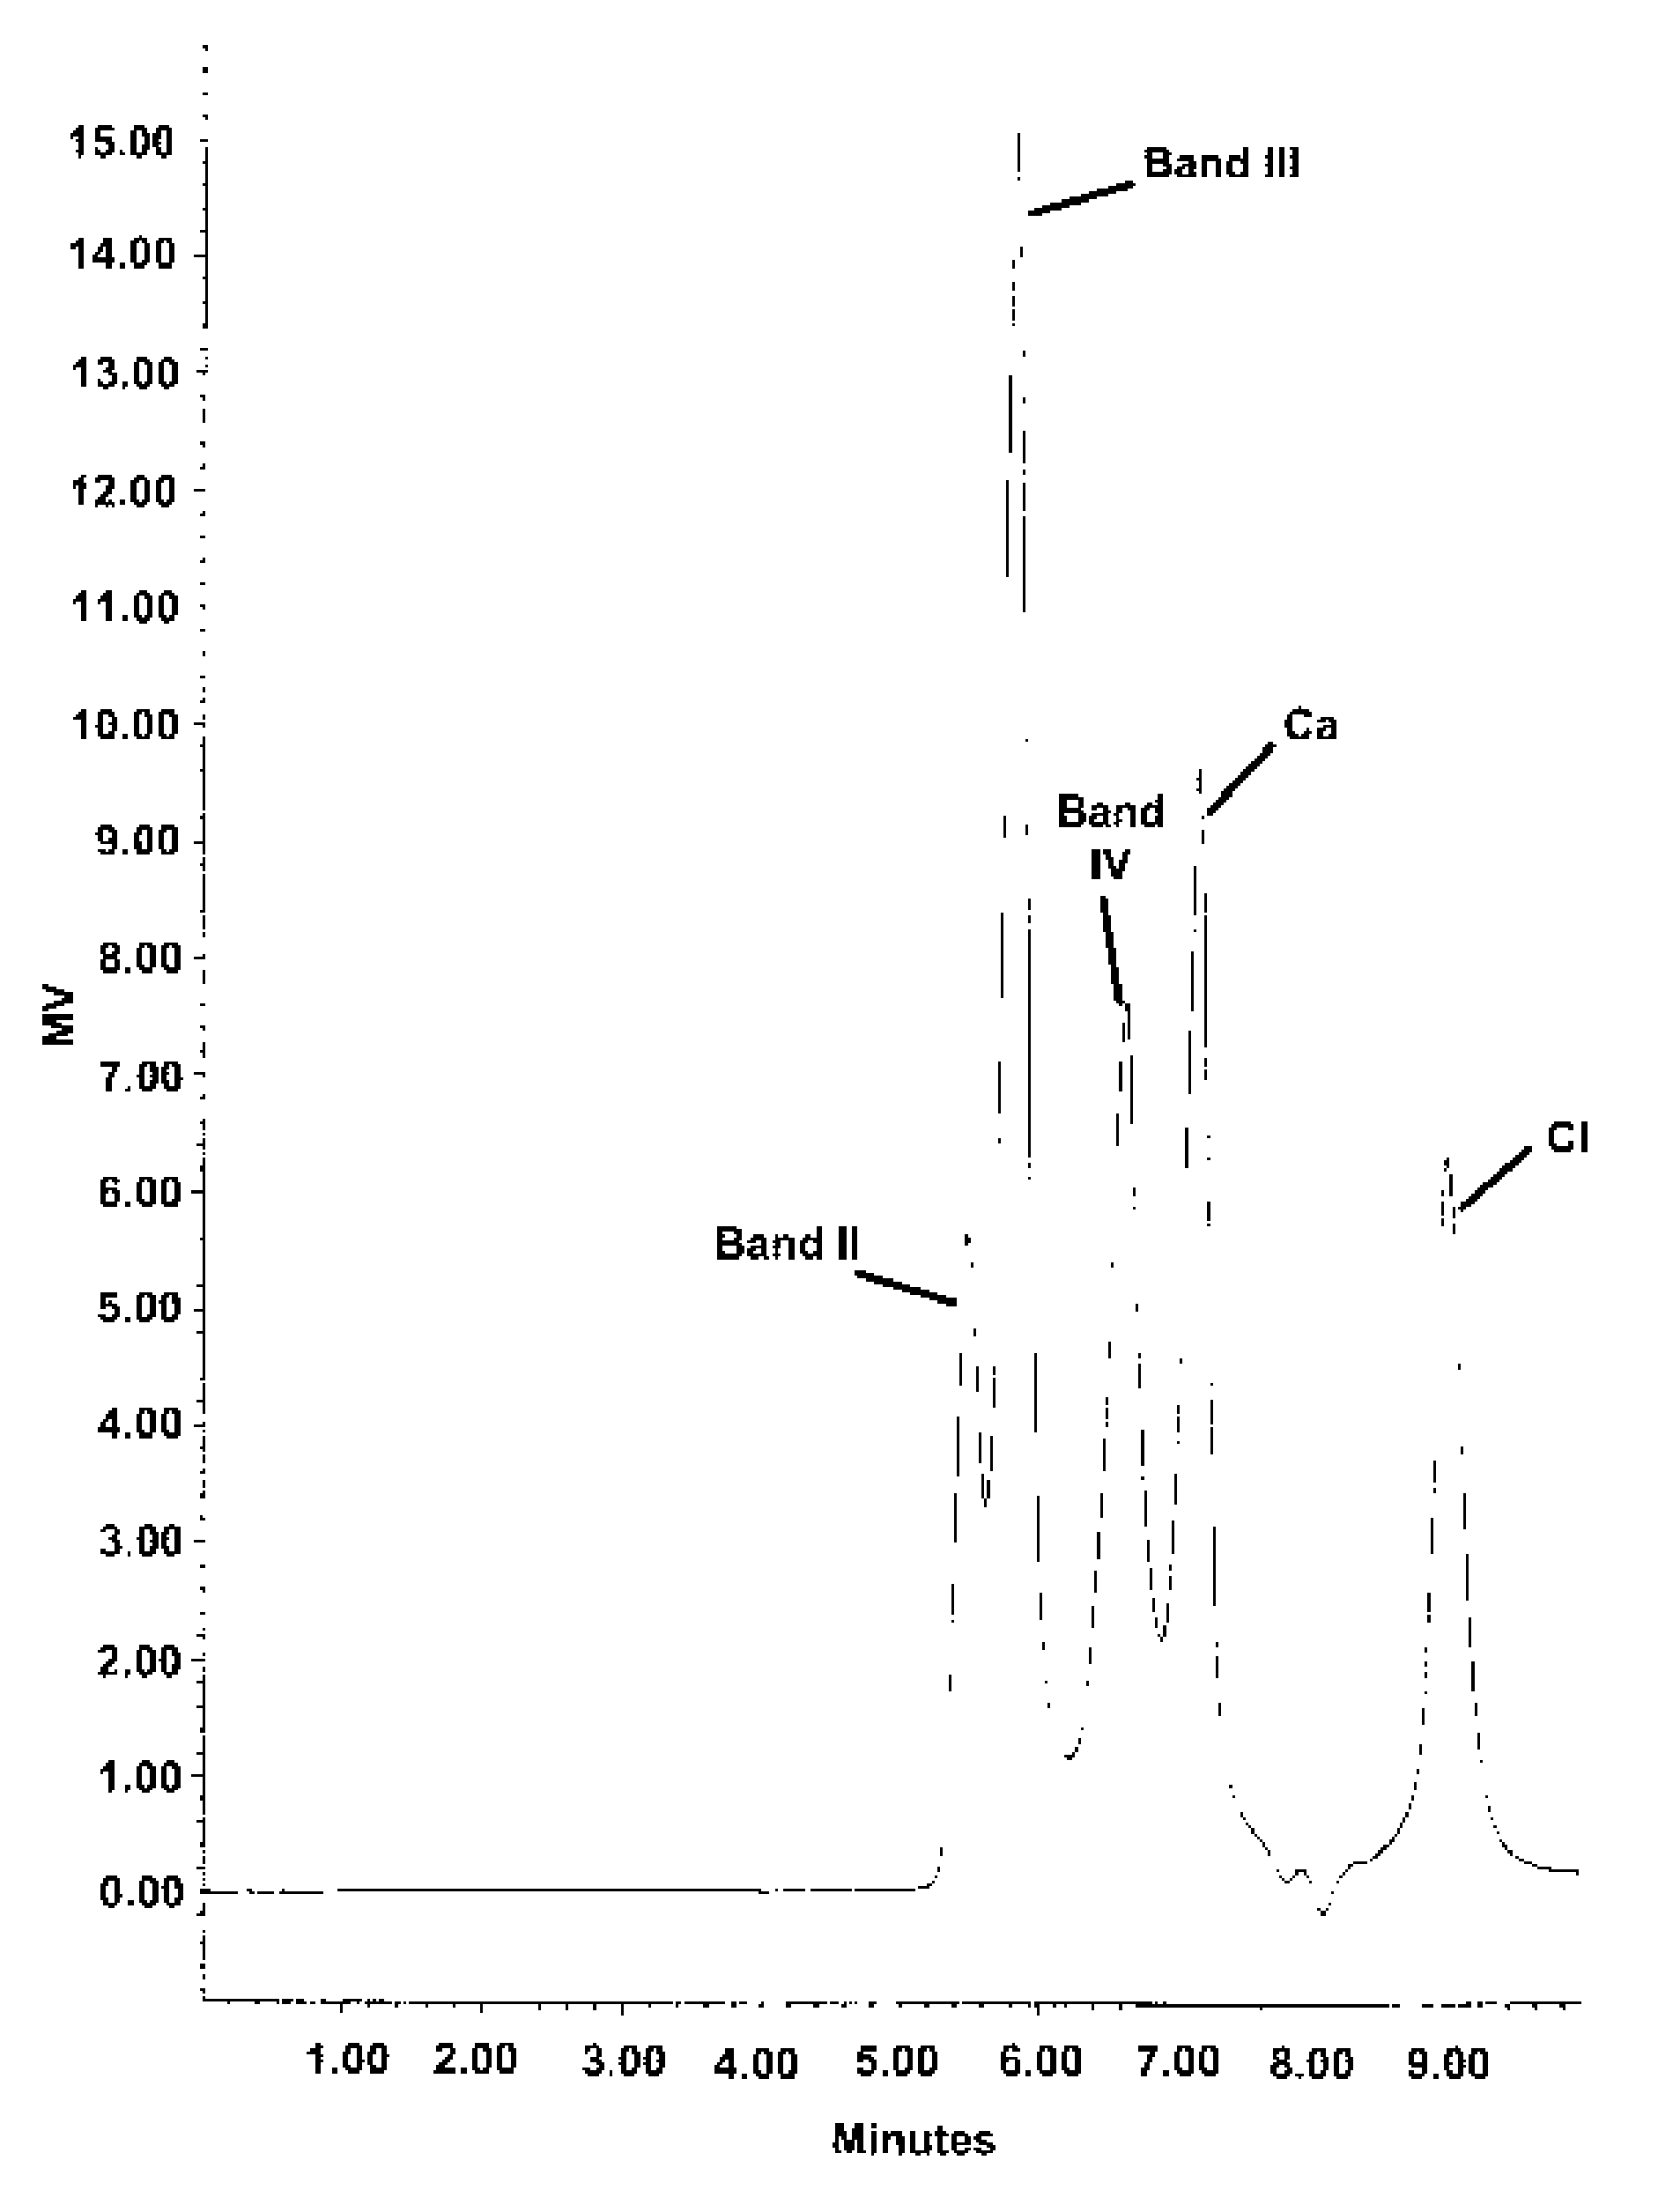 Stable buffered aluminum compositions having high HPLC bands iii and iv containing calcium/strontium